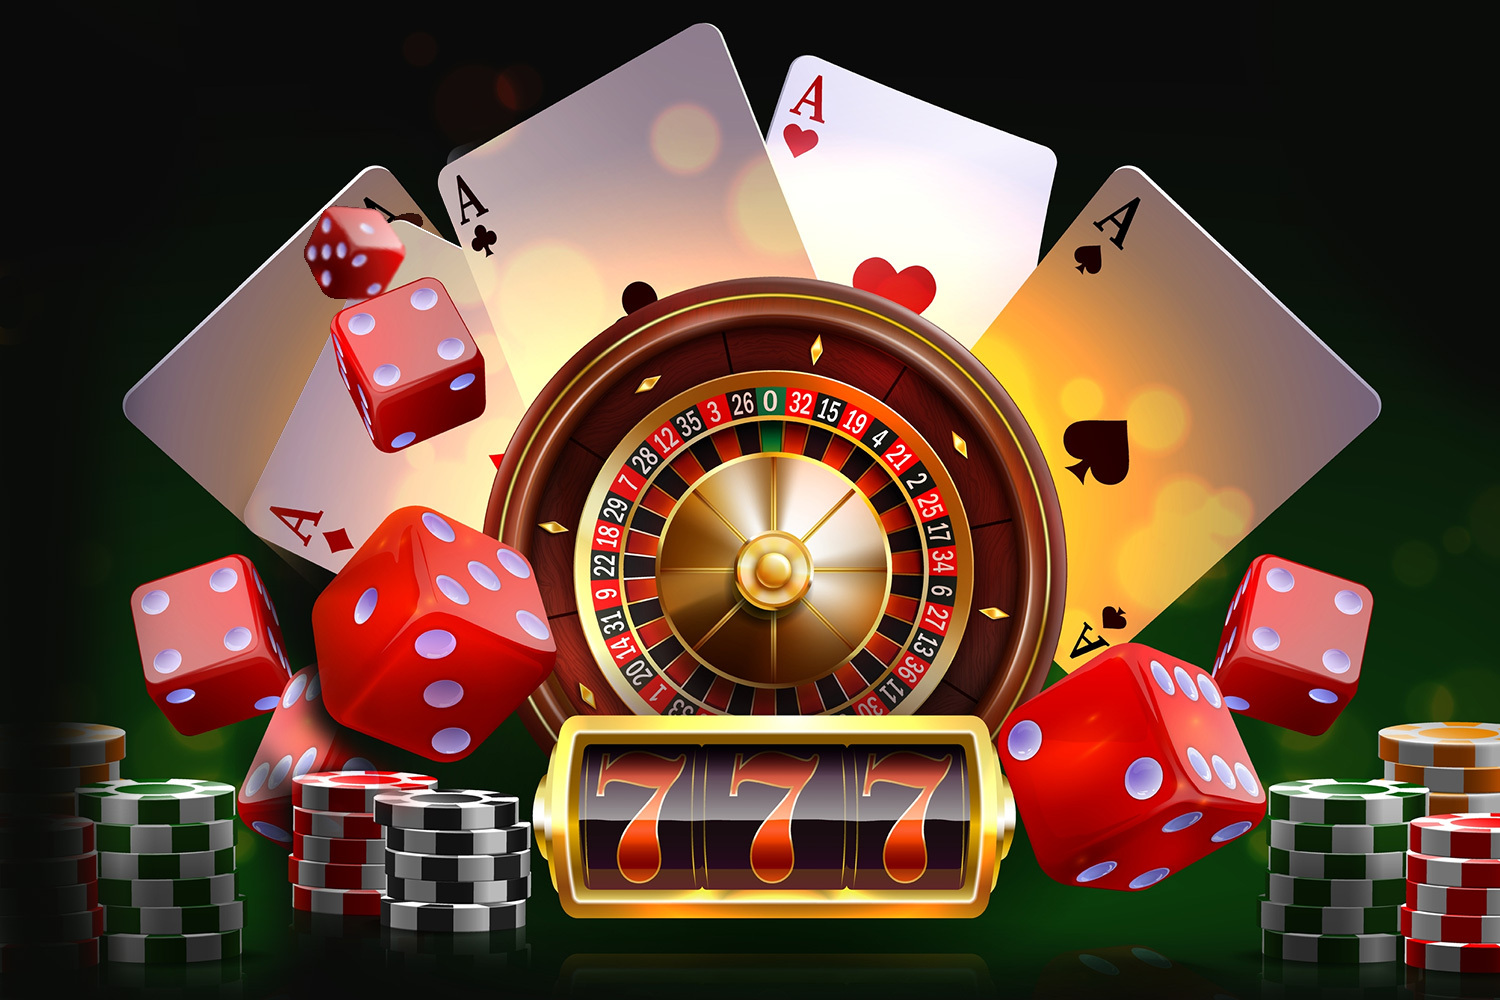 Online casino sign up offers: Get the best casino deals and no deposit welcome offers | The Sun